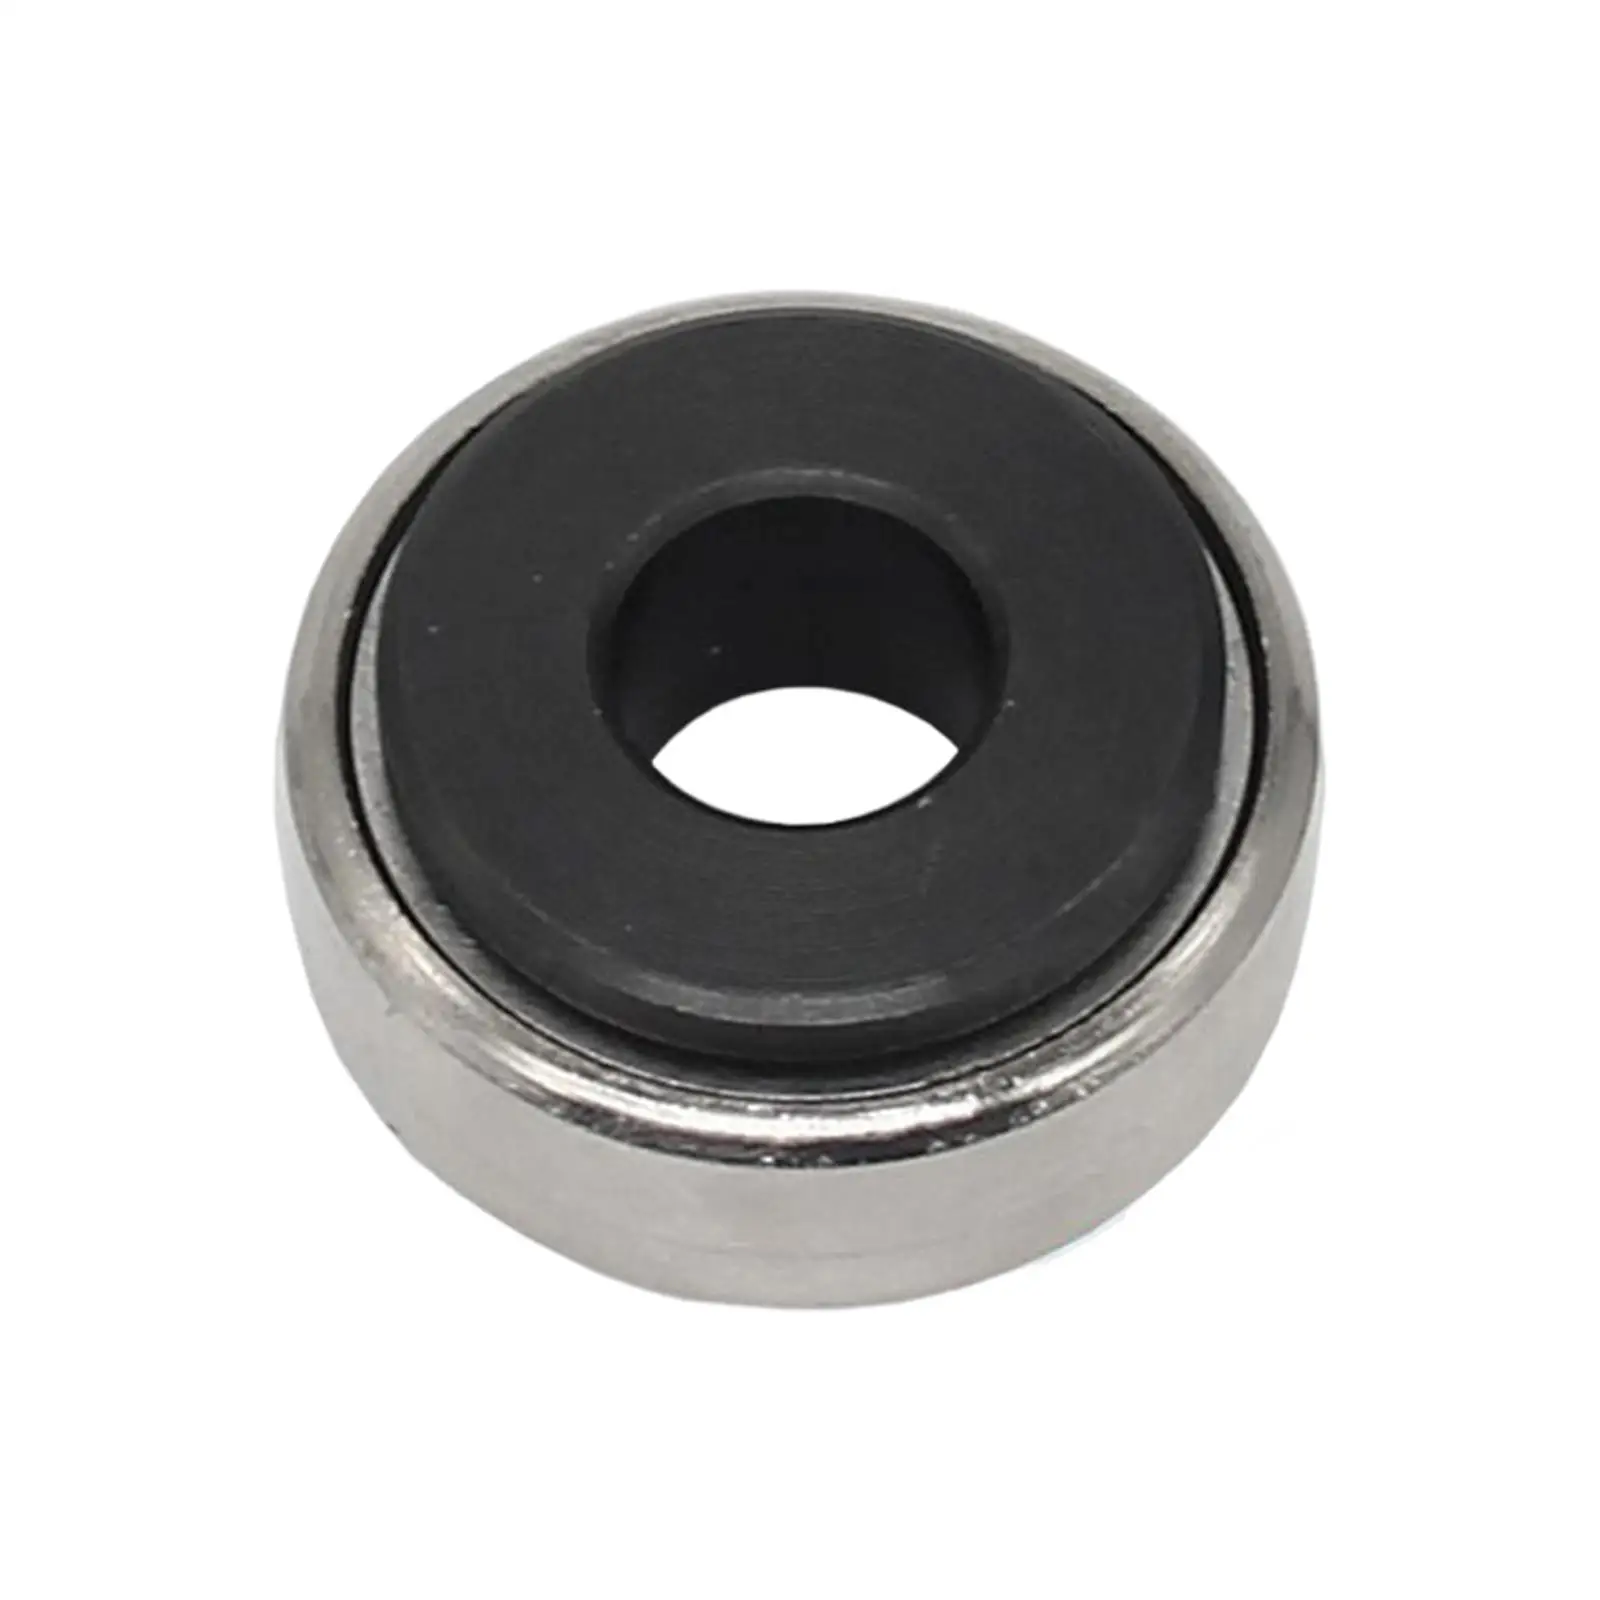 

Durable Wheel Stud Installer 24234 for Car Trucks Wheel Stud up to 14mm 9/16" Diameter Use with Impact Wrench Press Studs